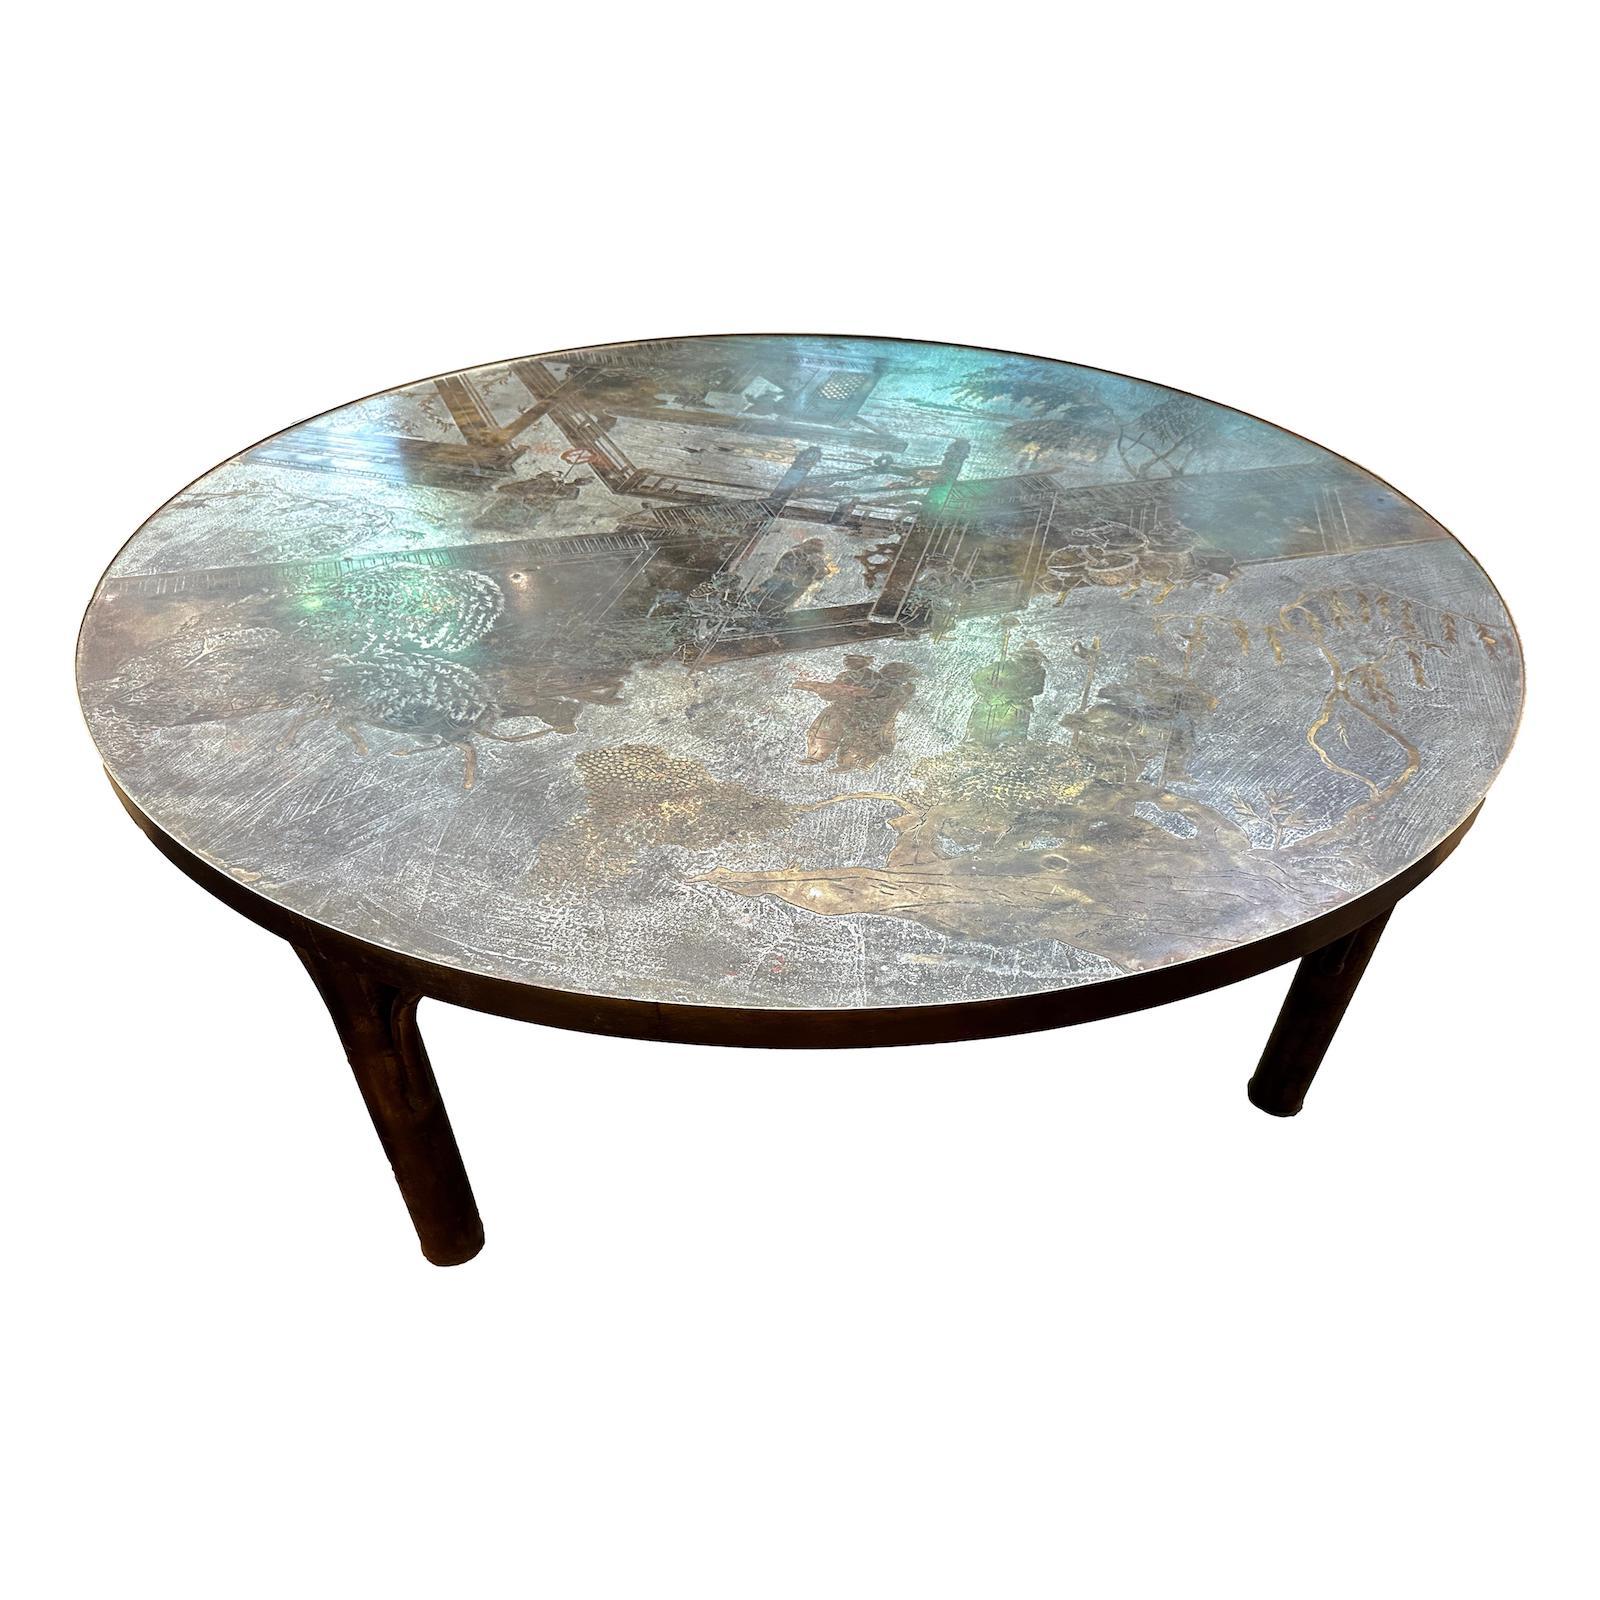 A round circa 1960s LaVerne coffee table with palace scenes in a silver and gilt finish.

Measurements:
Height: 17.25
Diameter: 48.